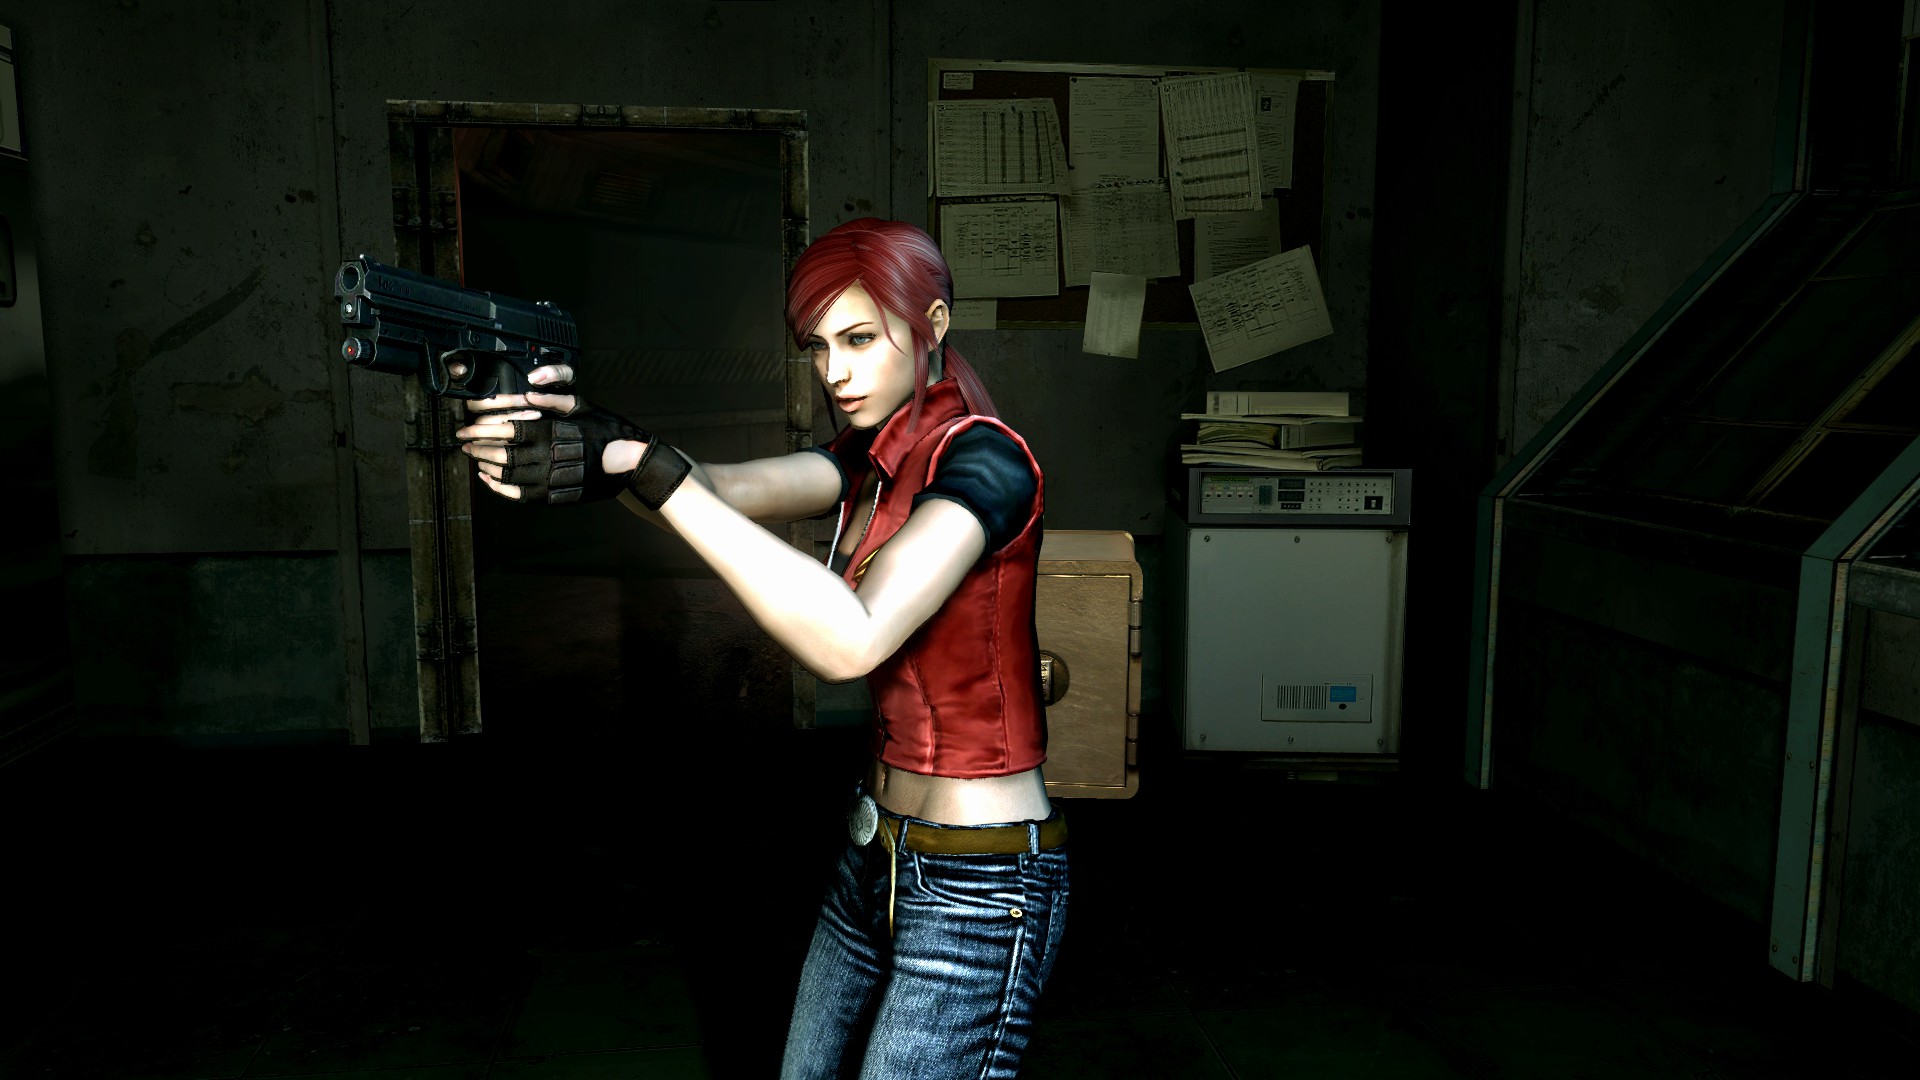 Darkside Chronicles Mod Pack *RE5 MODS* by xZombieAlix on DeviantArt